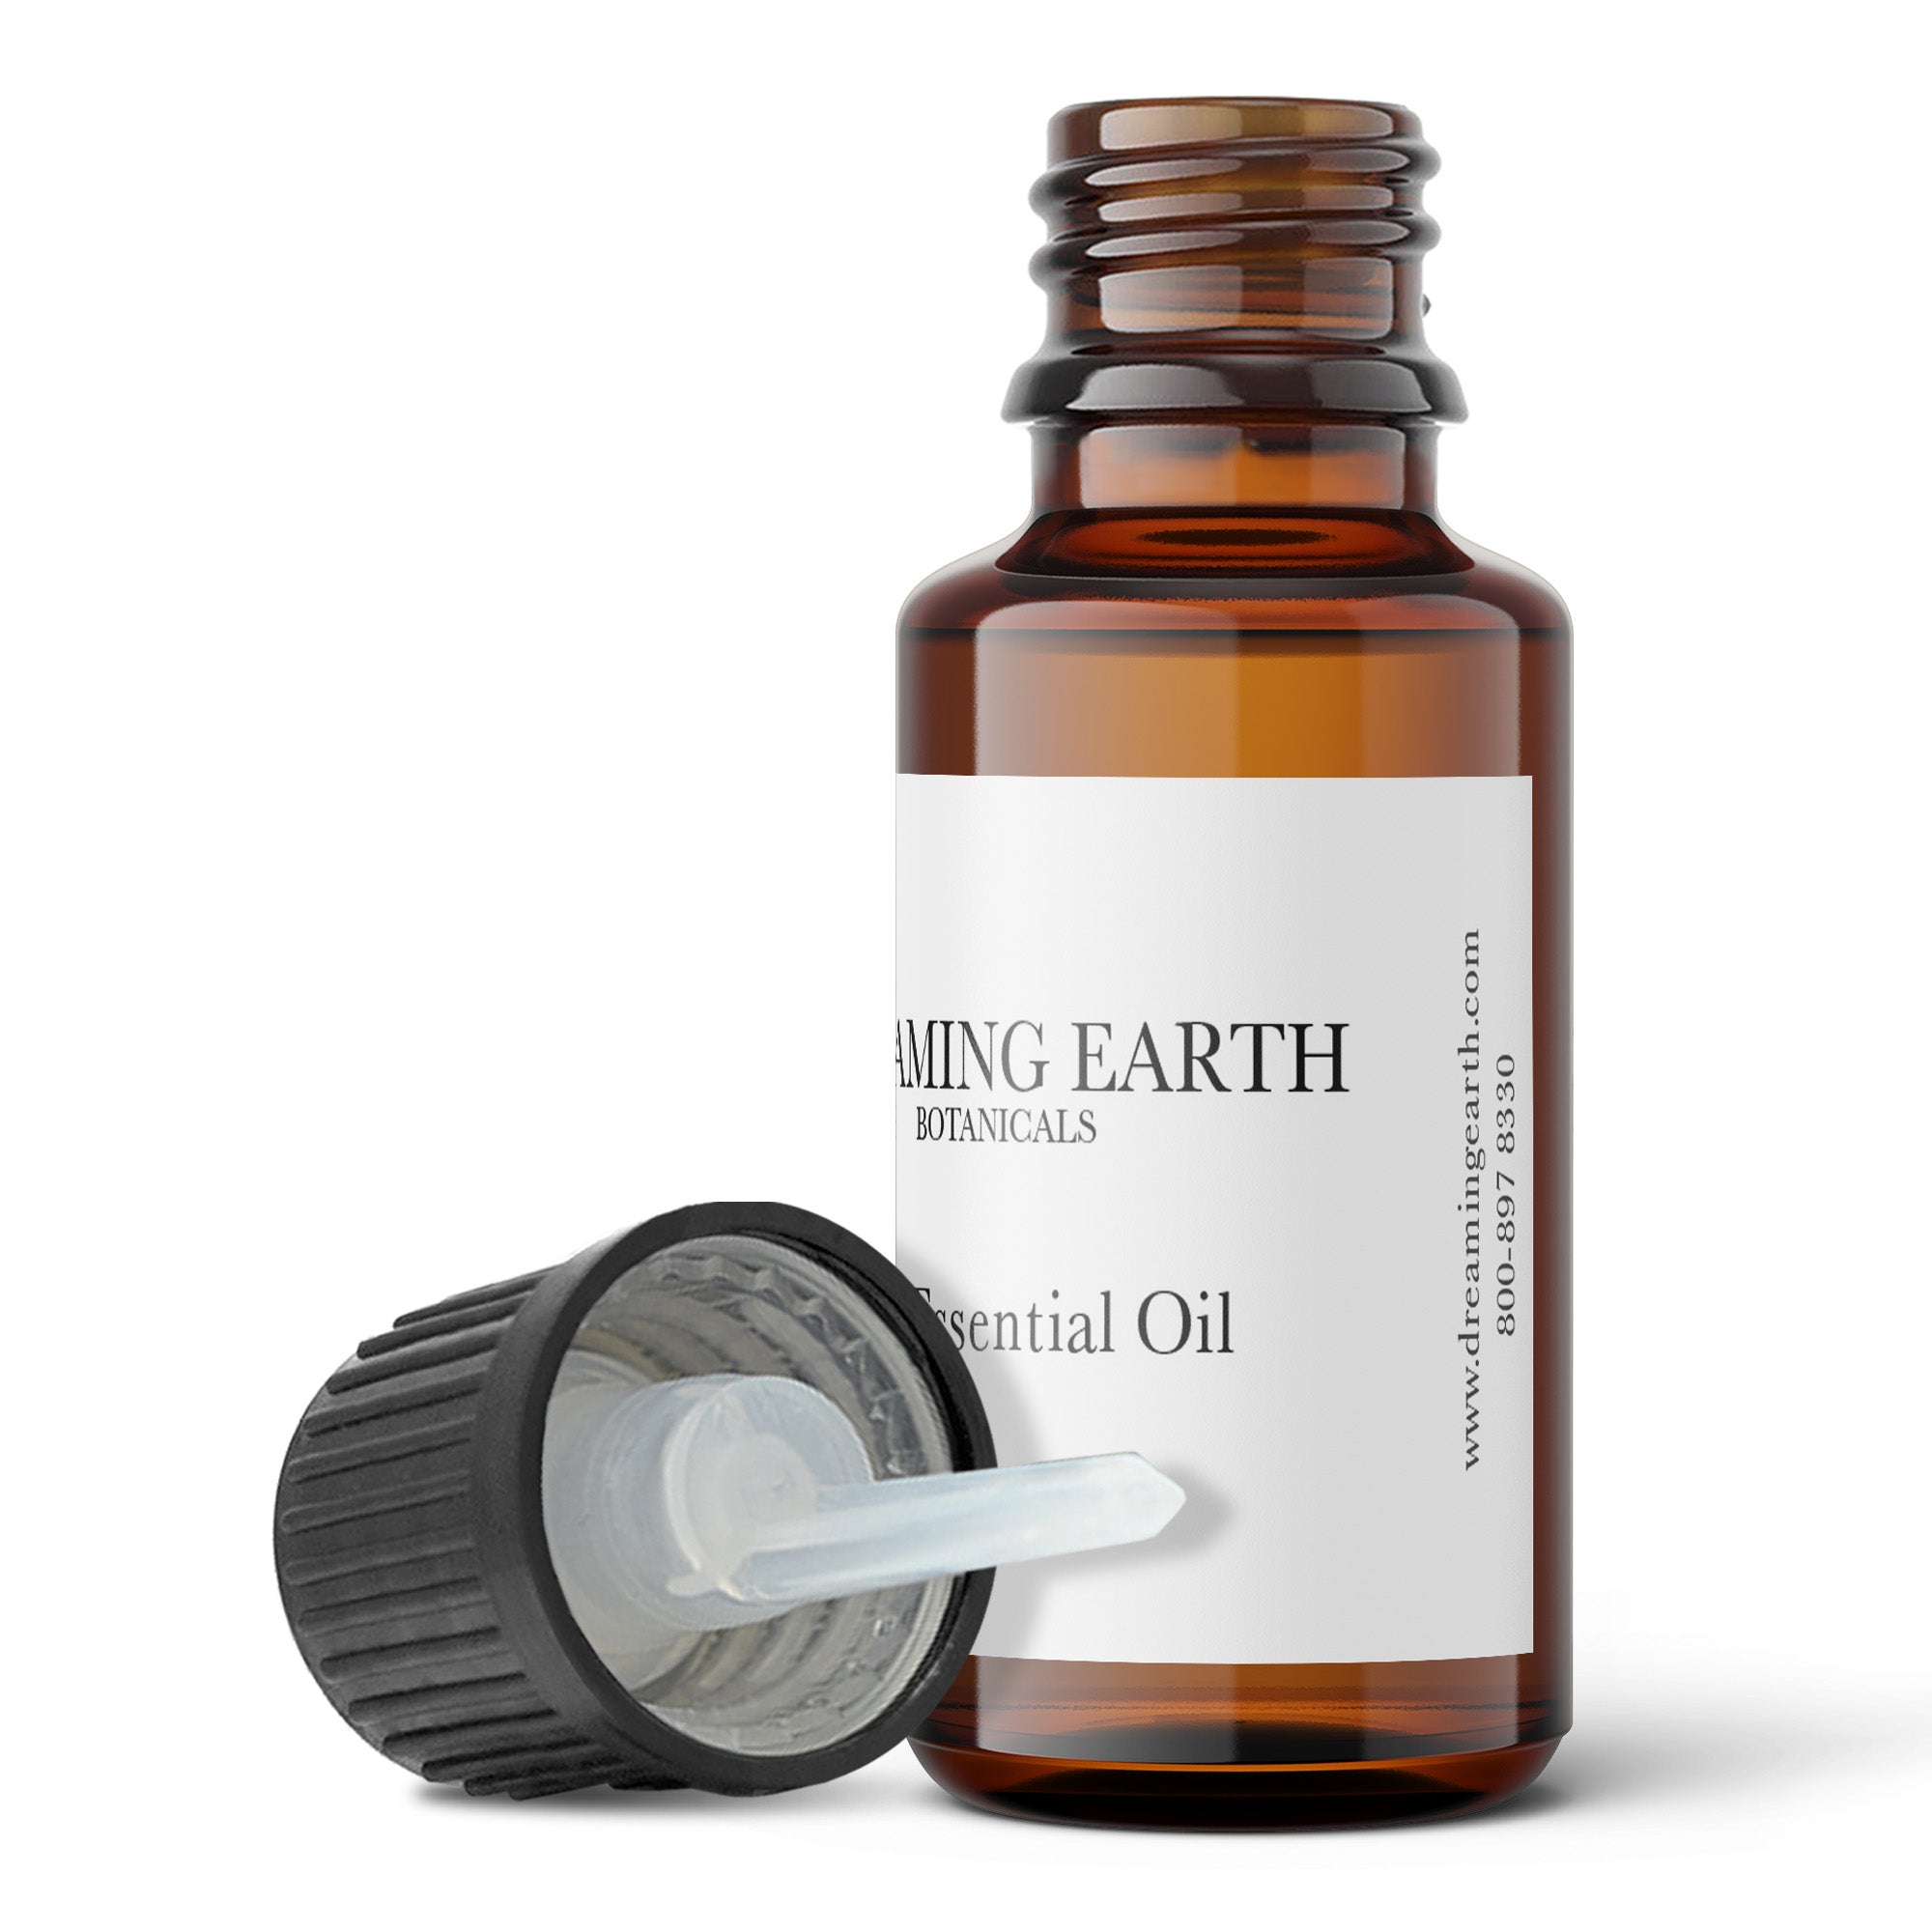 Load image into Gallery viewer, Nutmeg Essential Oil - Dreaming Earth Inc
